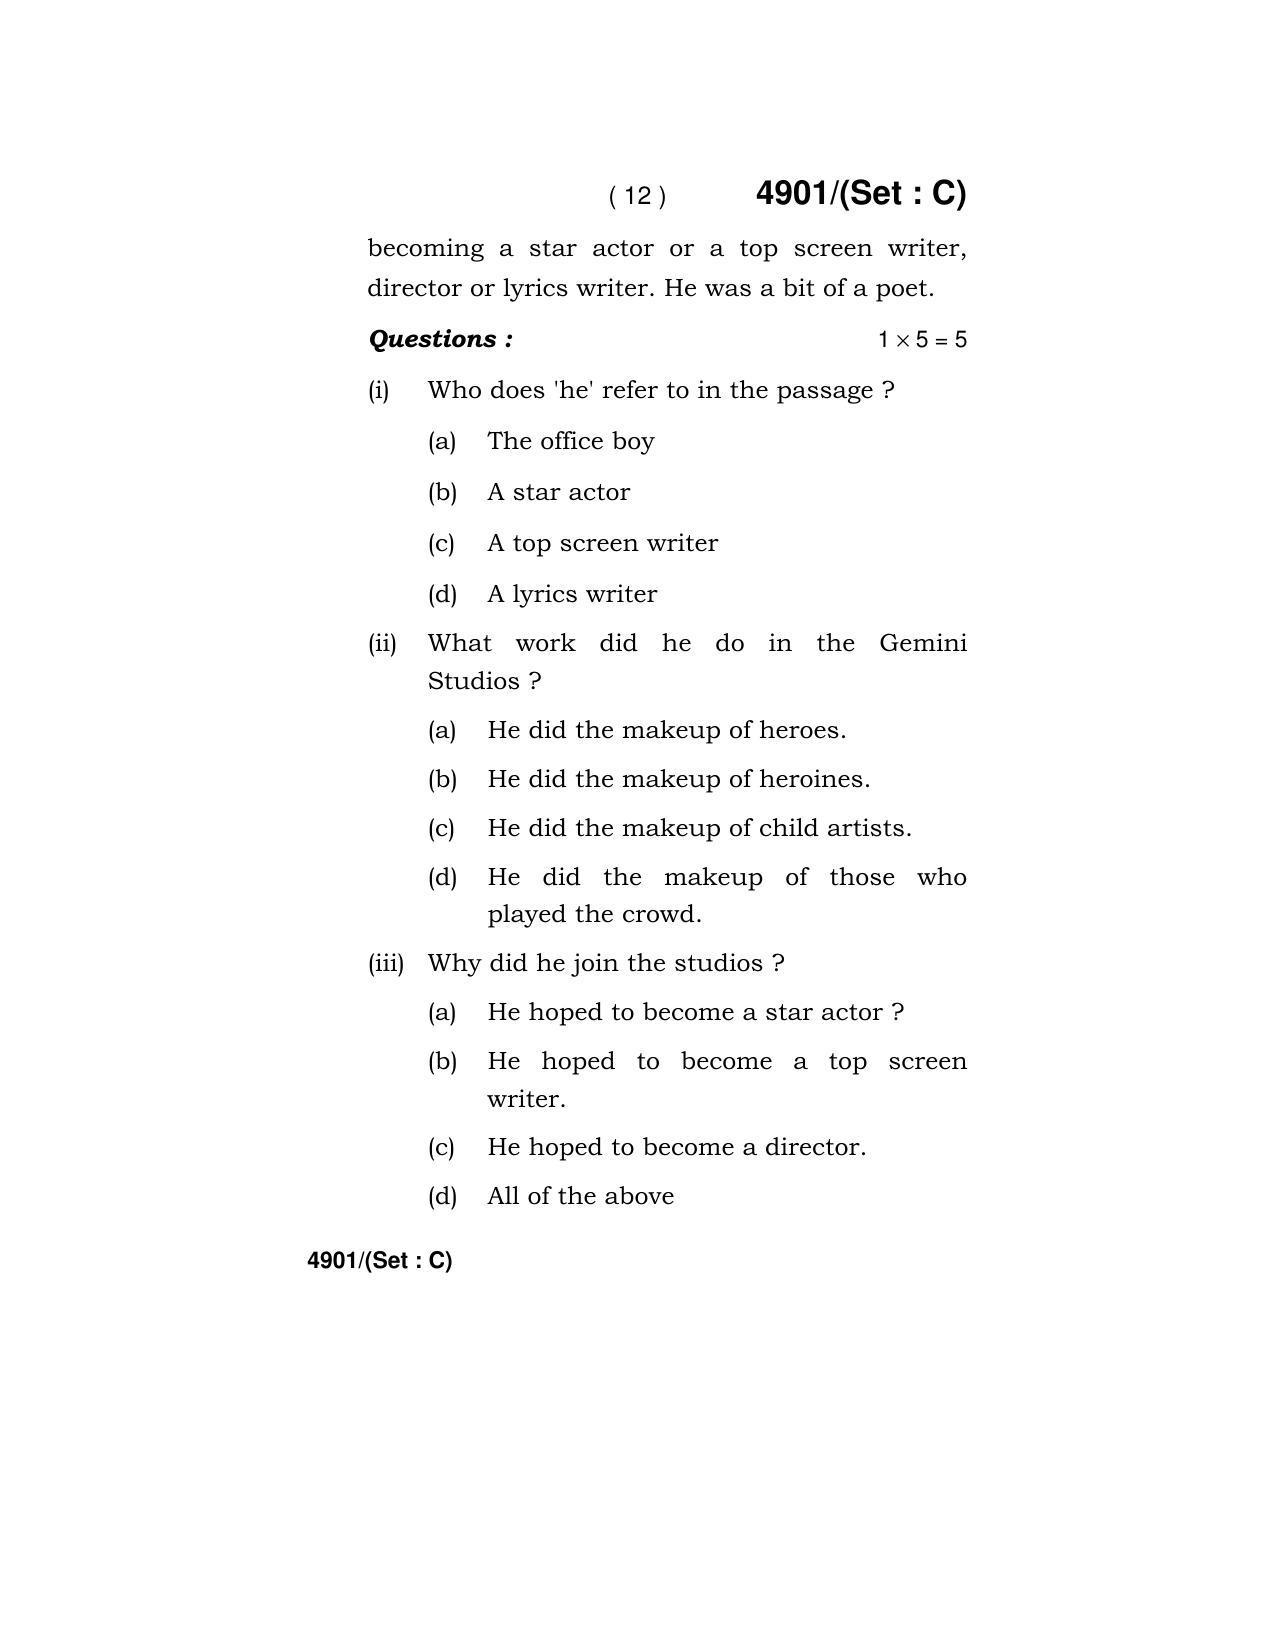 Haryana Board HBSE Class 12 English Core 2020 Question Paper - Page 44